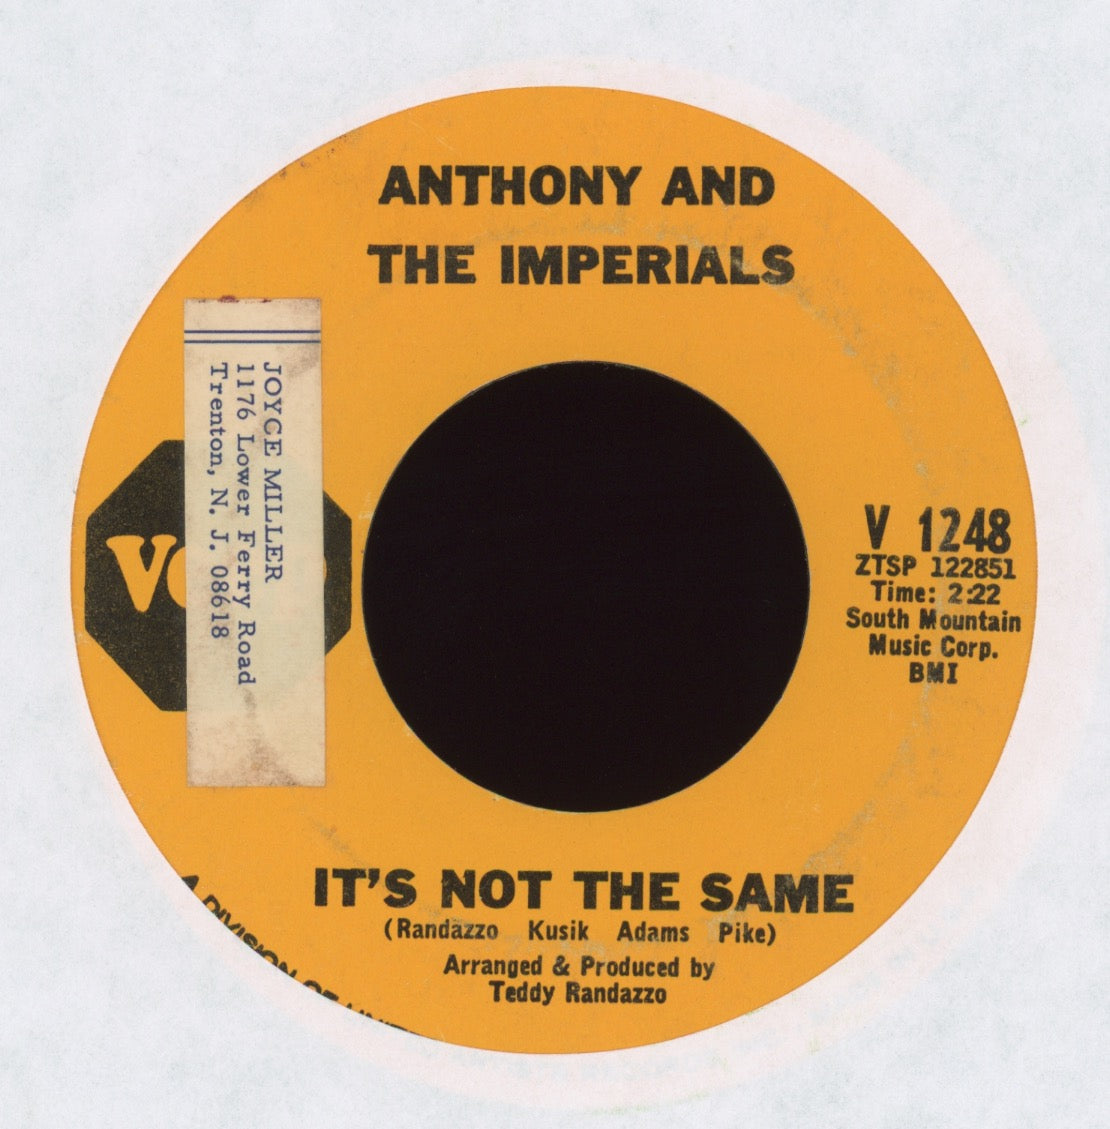 Little Anthony & The Imperials - It's Not The Same on Veep